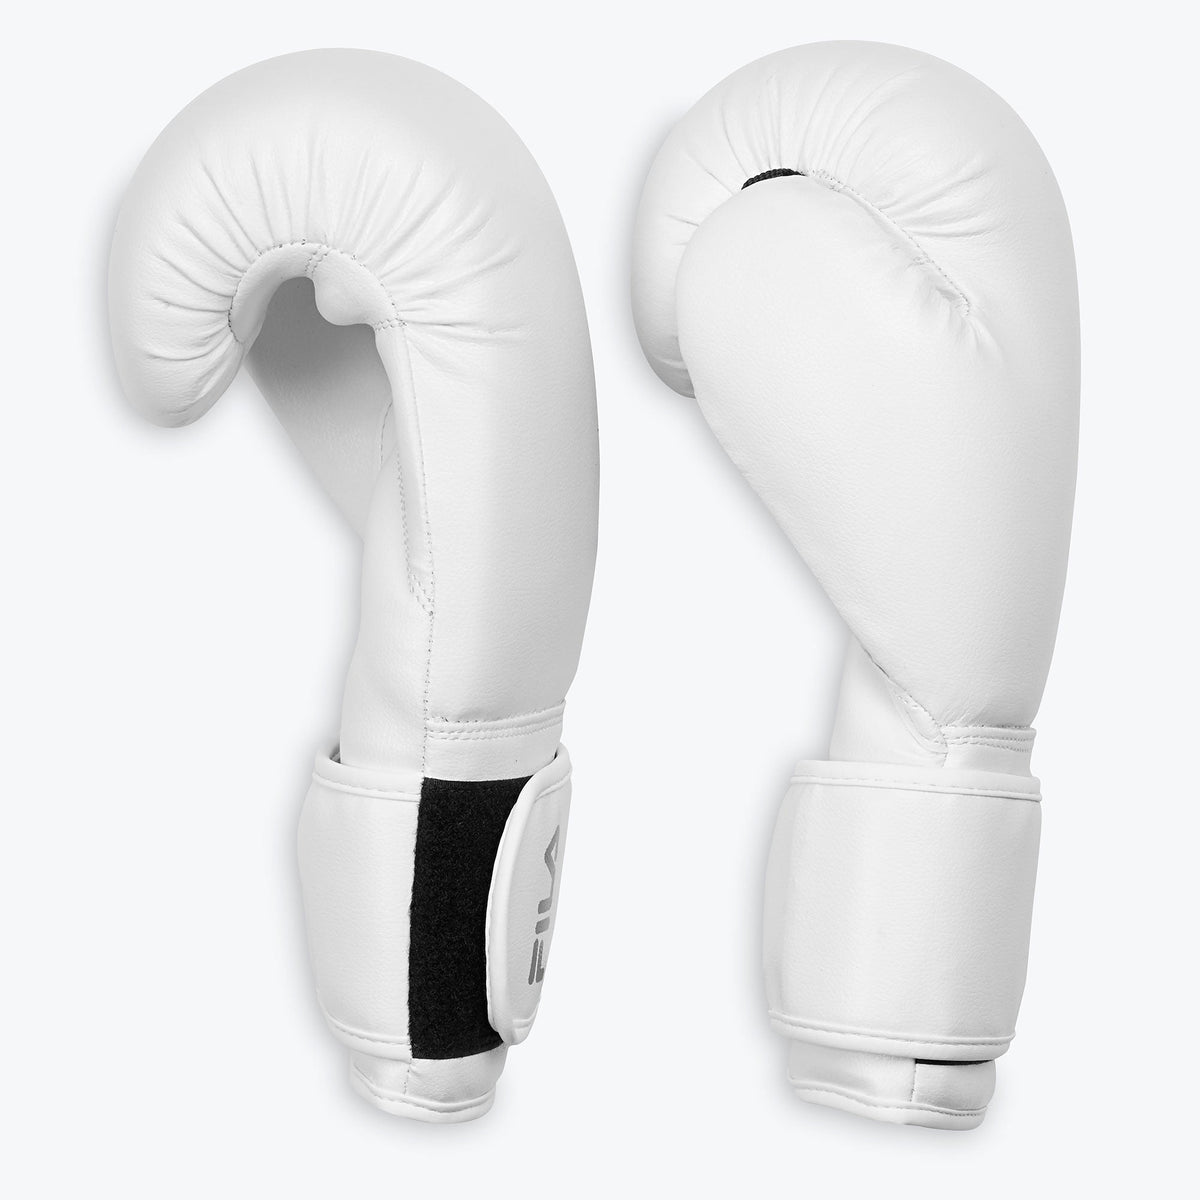 white boxing gloves from the side